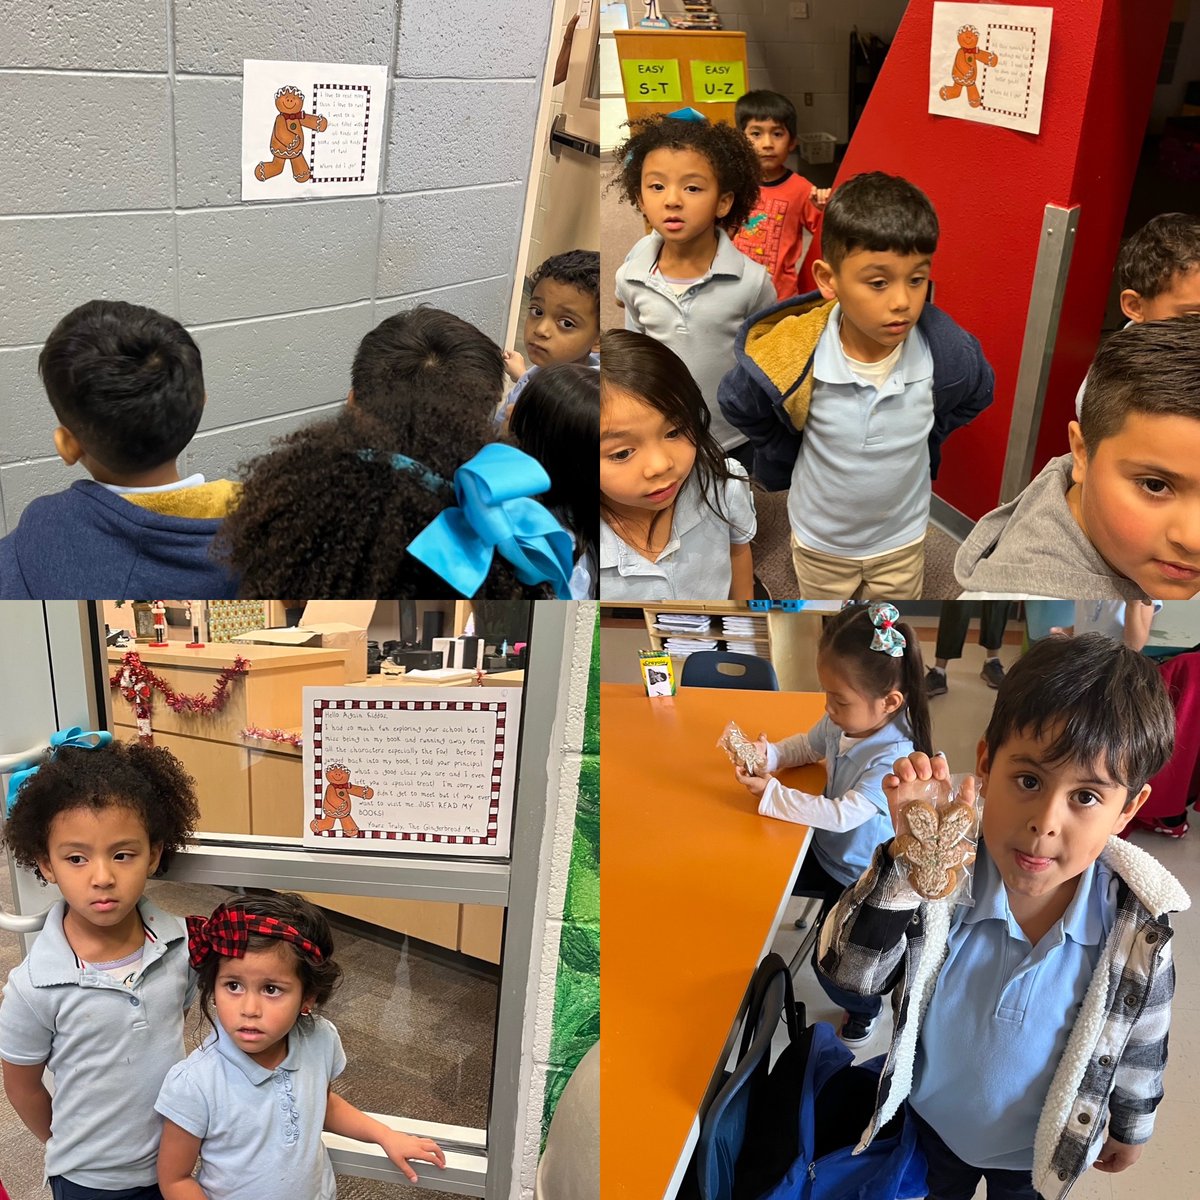 Our Pre-K Jaguars had fun trying to catch The Gingerbread Man. #Catchmeifyoucan #Gingerbread #findtheartinyourheart #TeamSISD  @MSmith_PDNFAA @lwaters_PDN @PDN_Academy